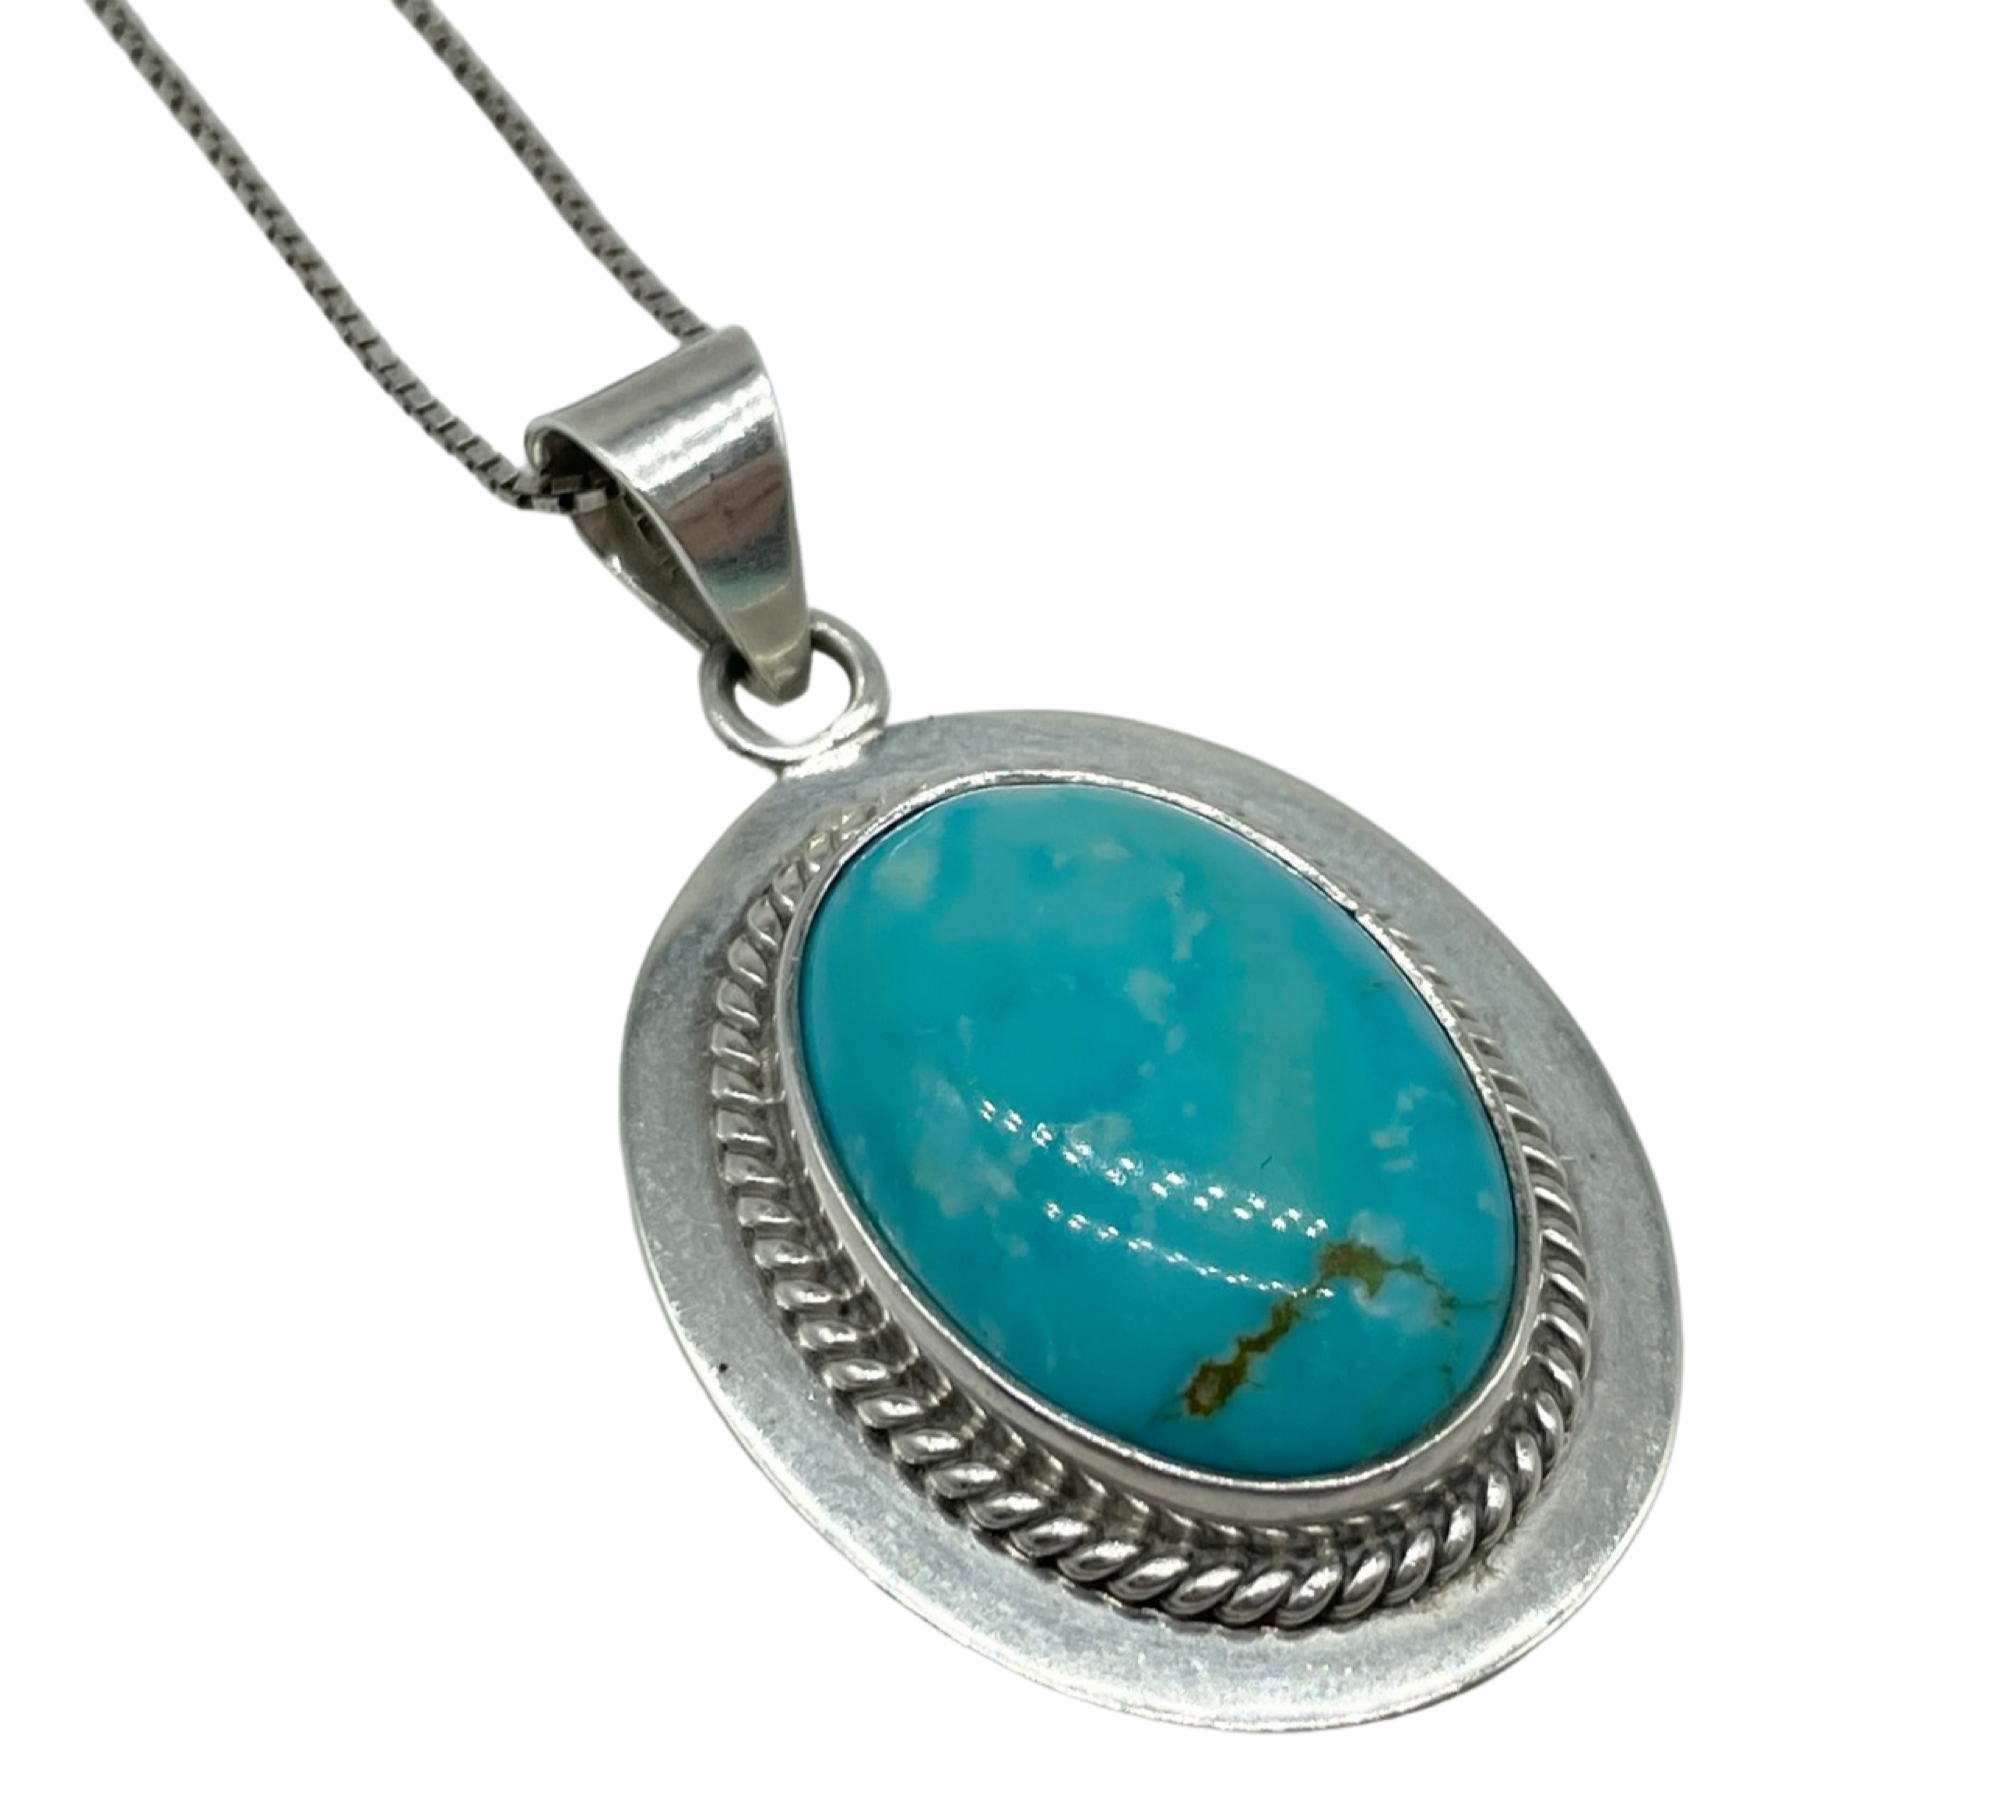 sterling silver stabilized turquoise pendant necklace